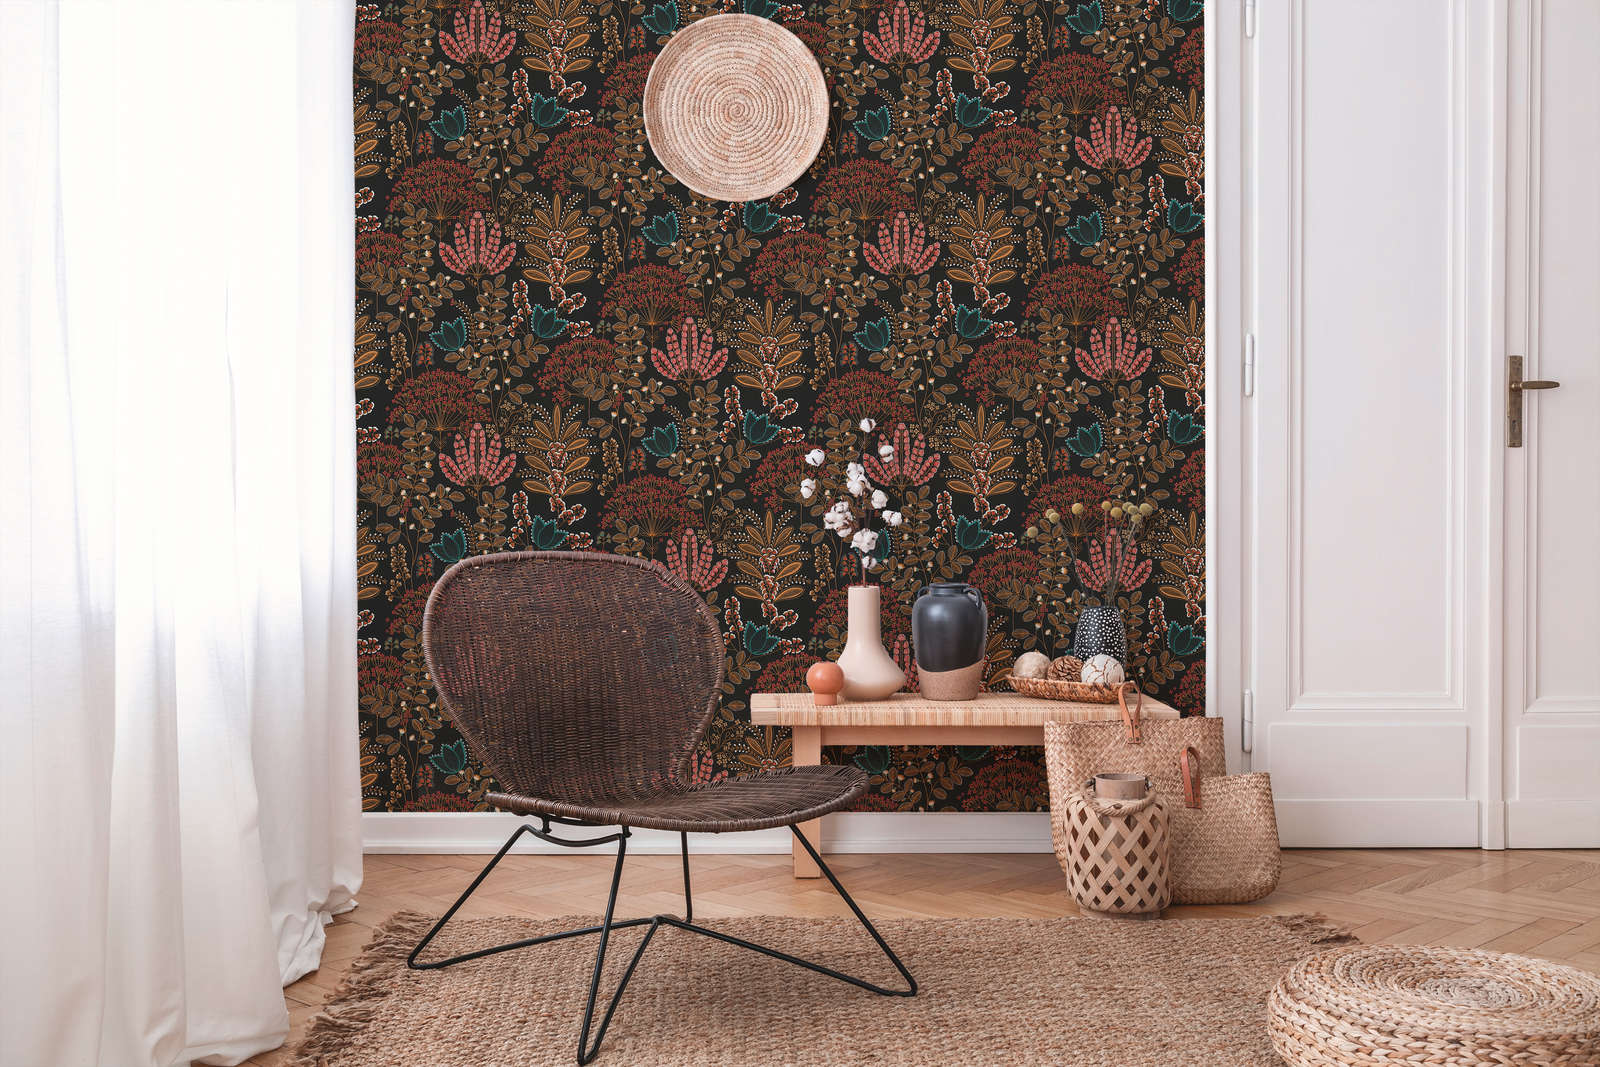             Floral non-woven wallpaper with leaves in retro style slightly textured, matt - black, multicoloured, petrol
        